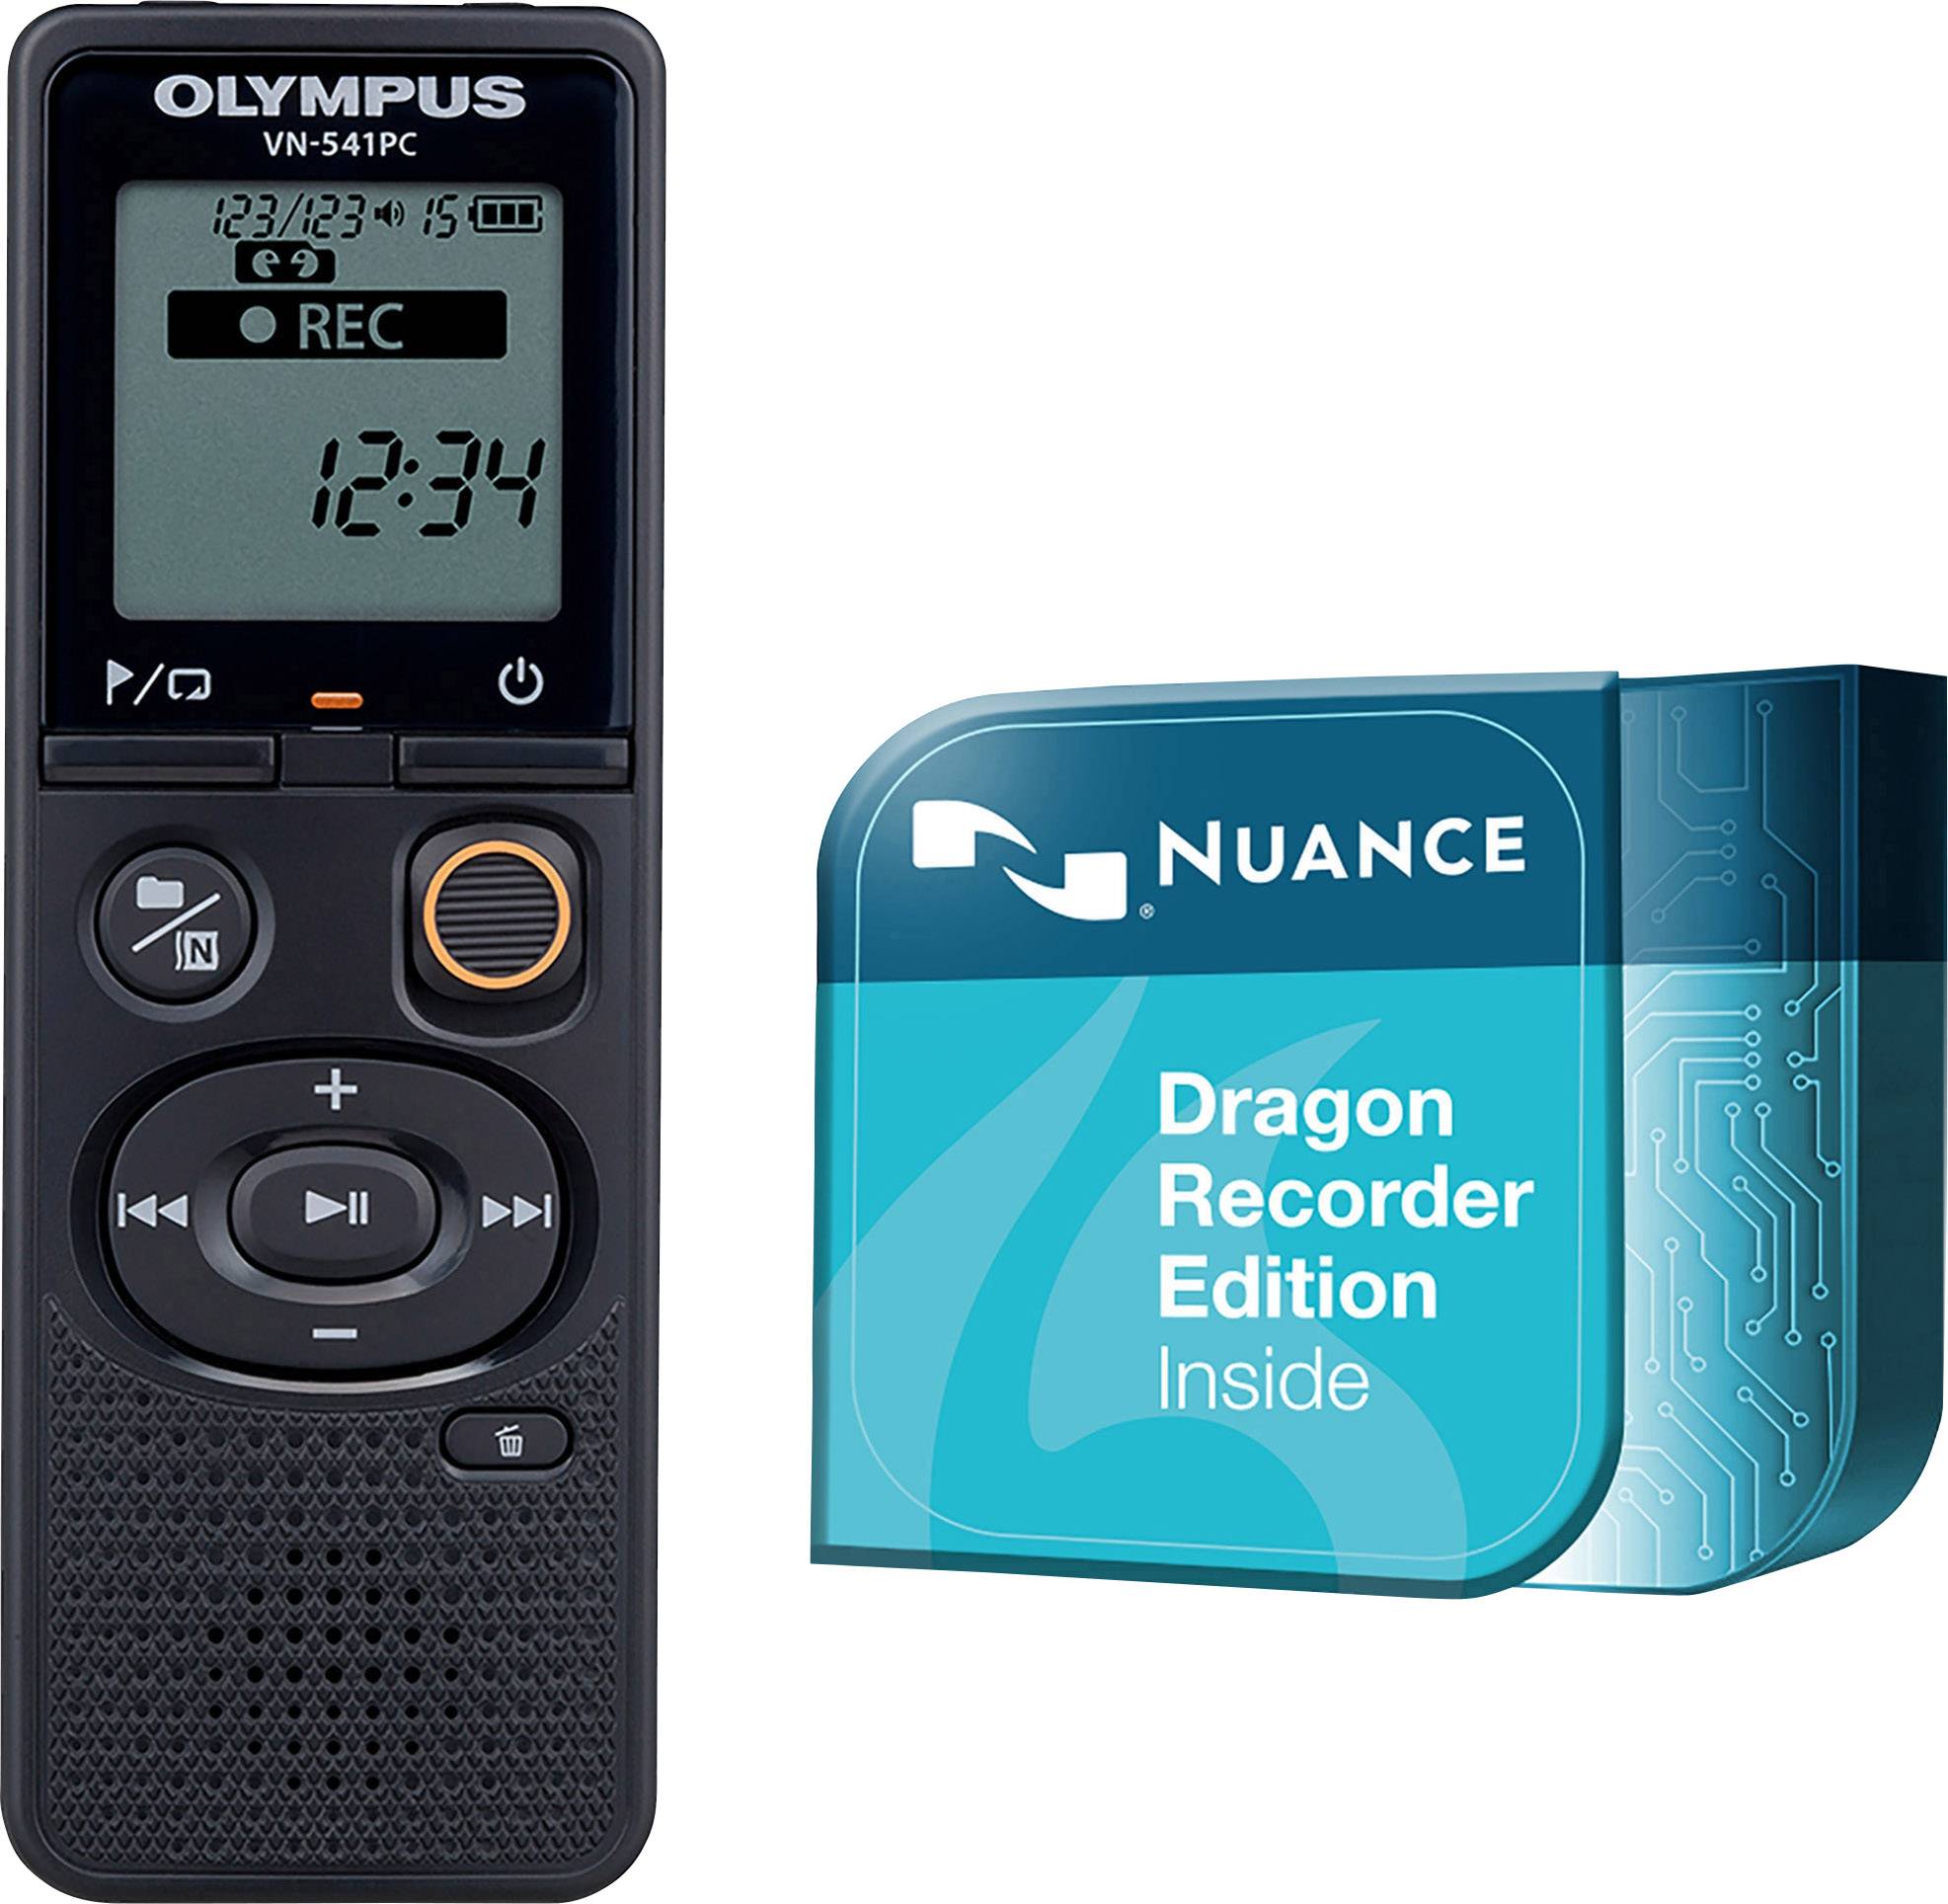 Olympus VN-541PC + Dragon Recorder Edition Digital dictaphone Max